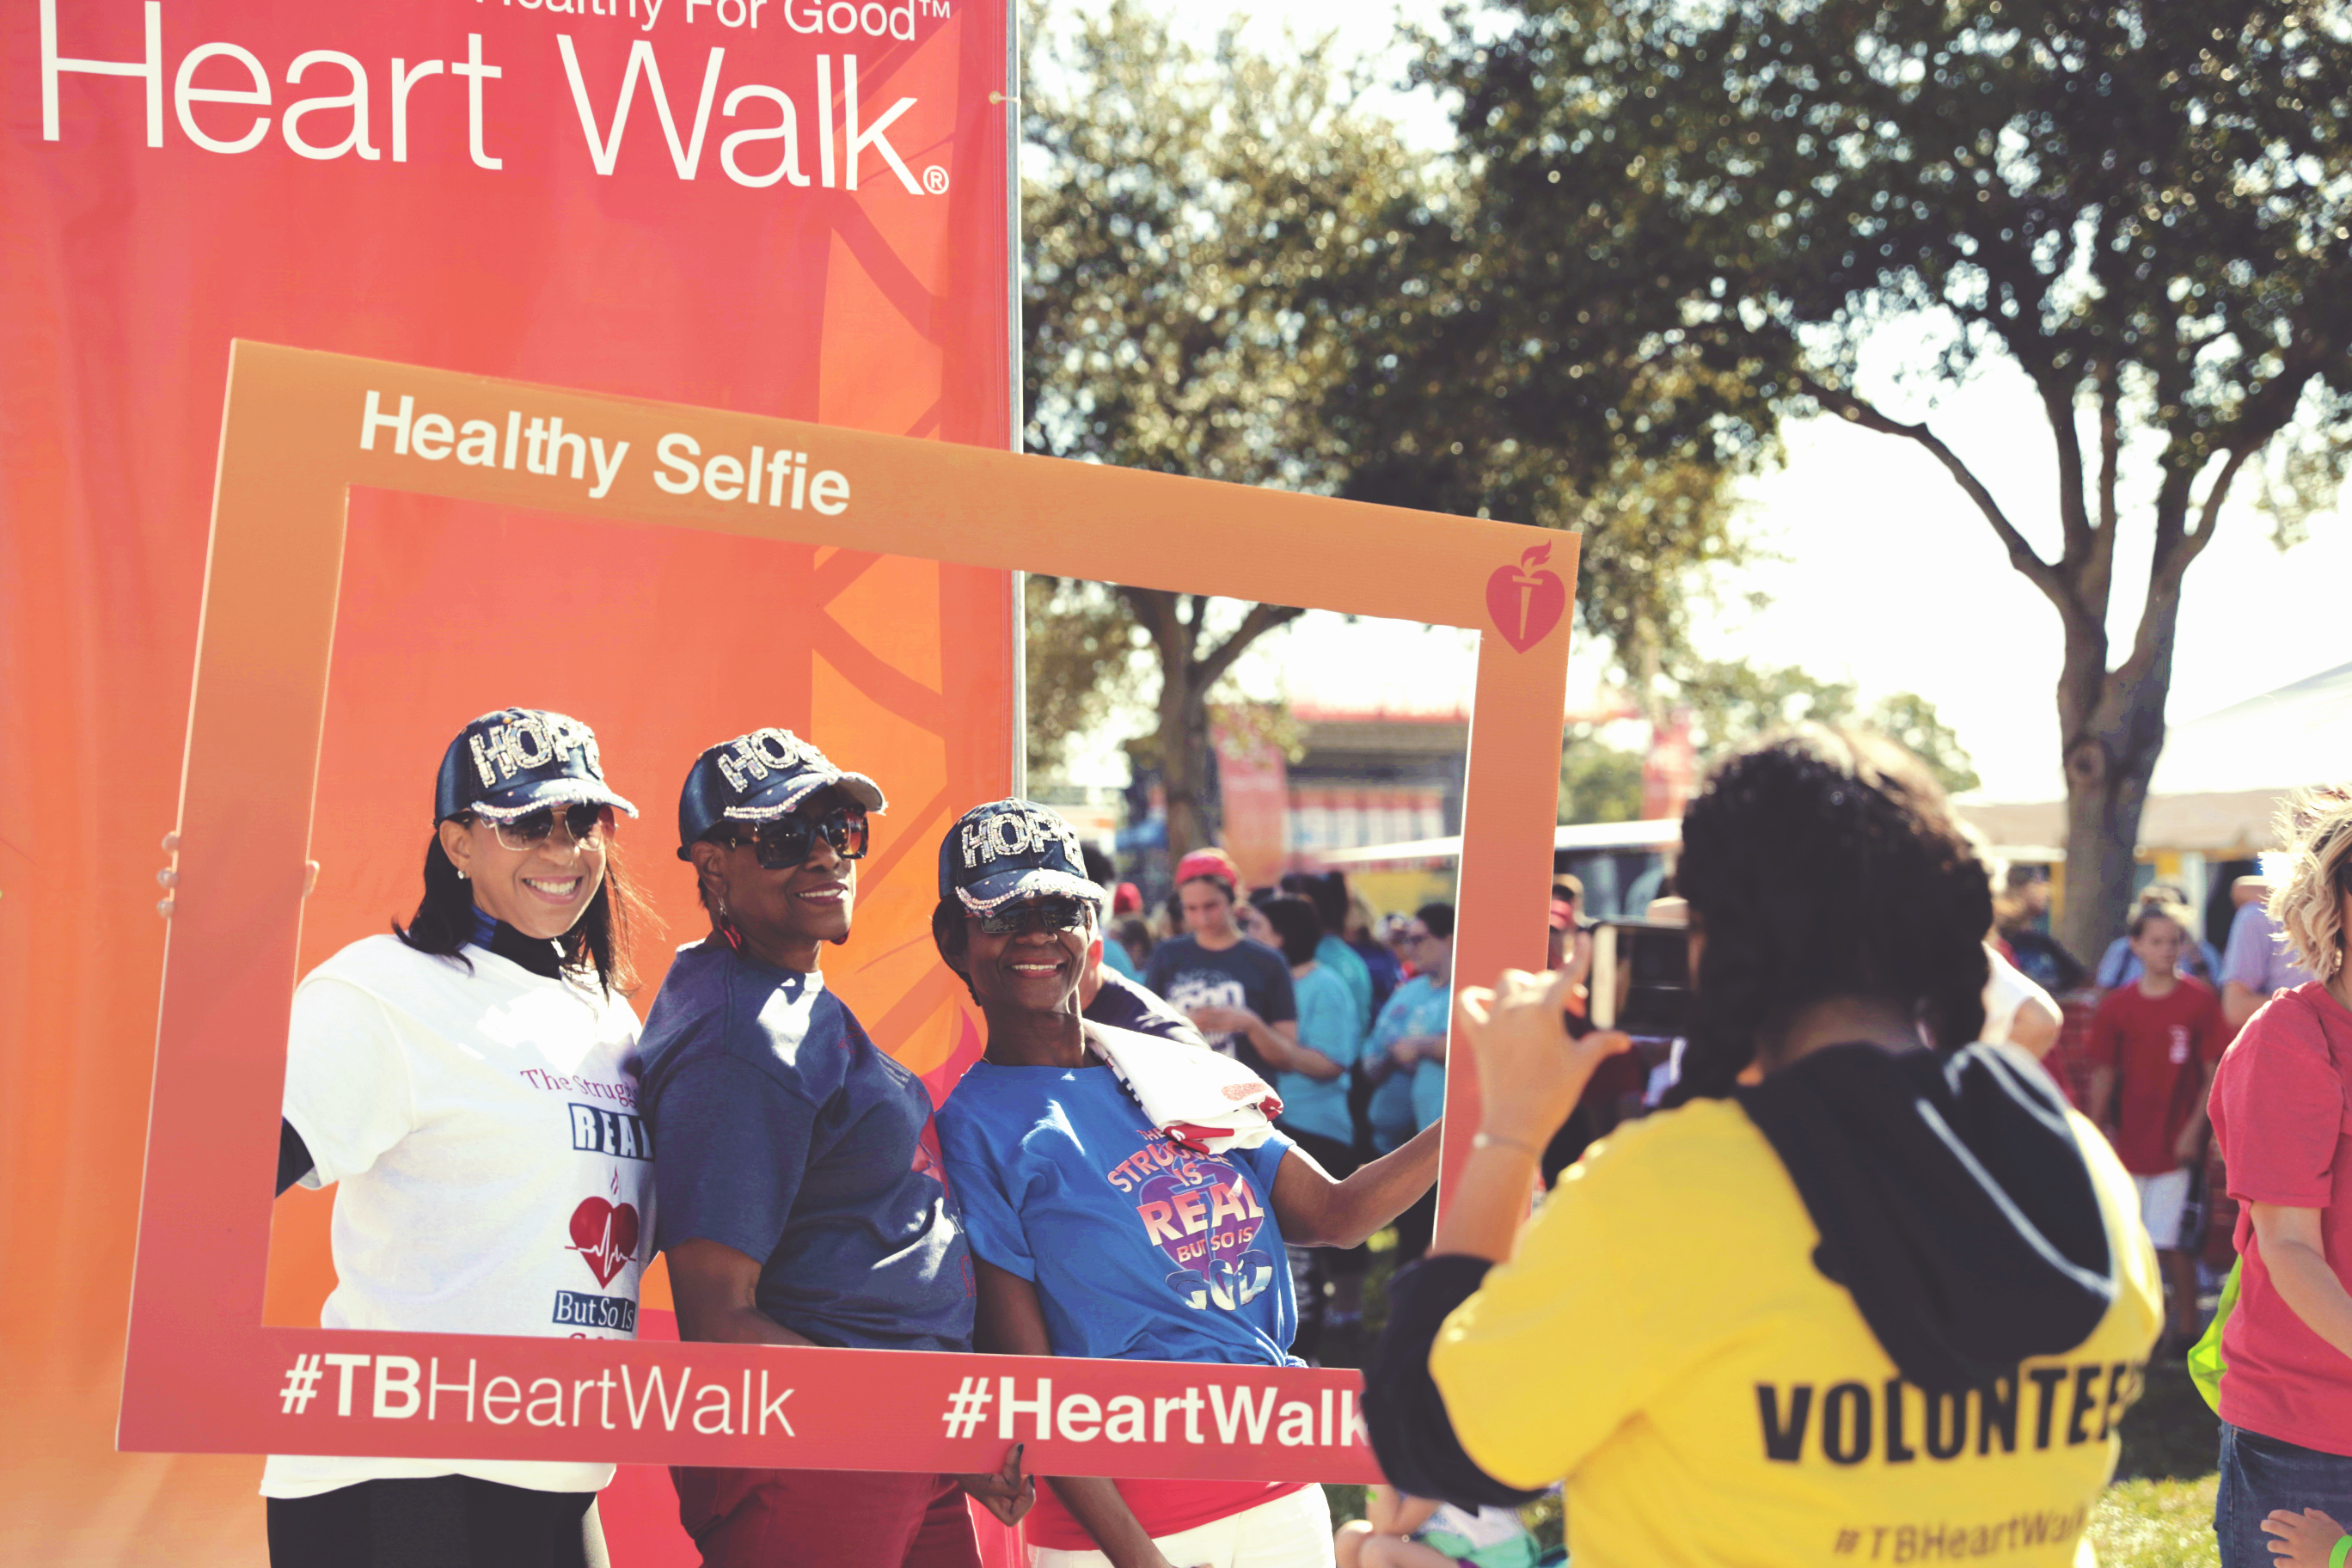 American Heart Associations Rebranded Heart Walk Experience Design - event photo booth